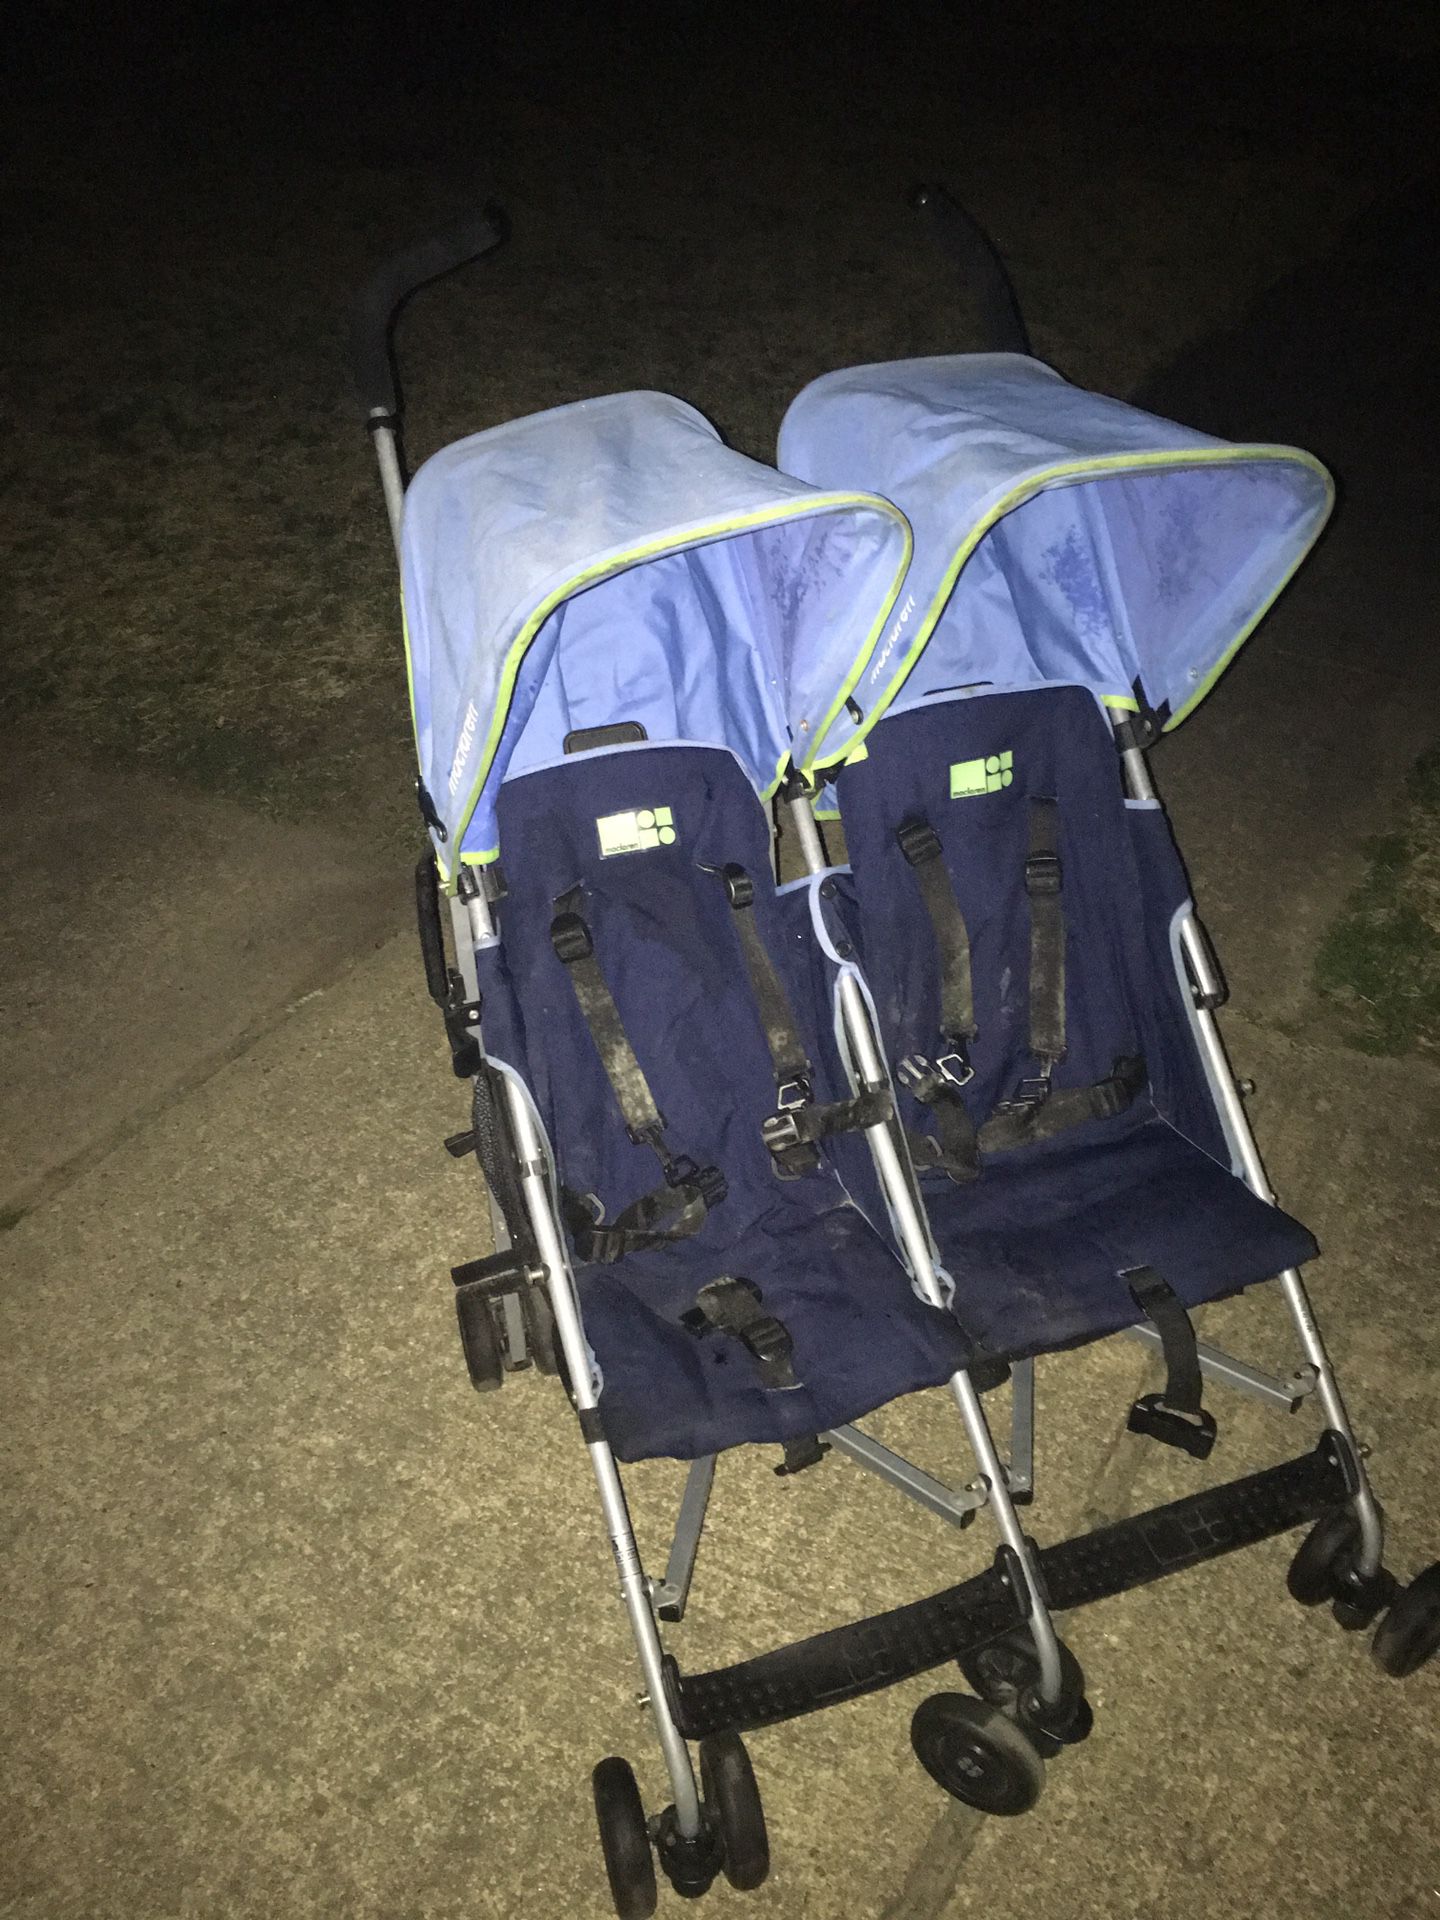 LNEW double stroller first 60$ takes it